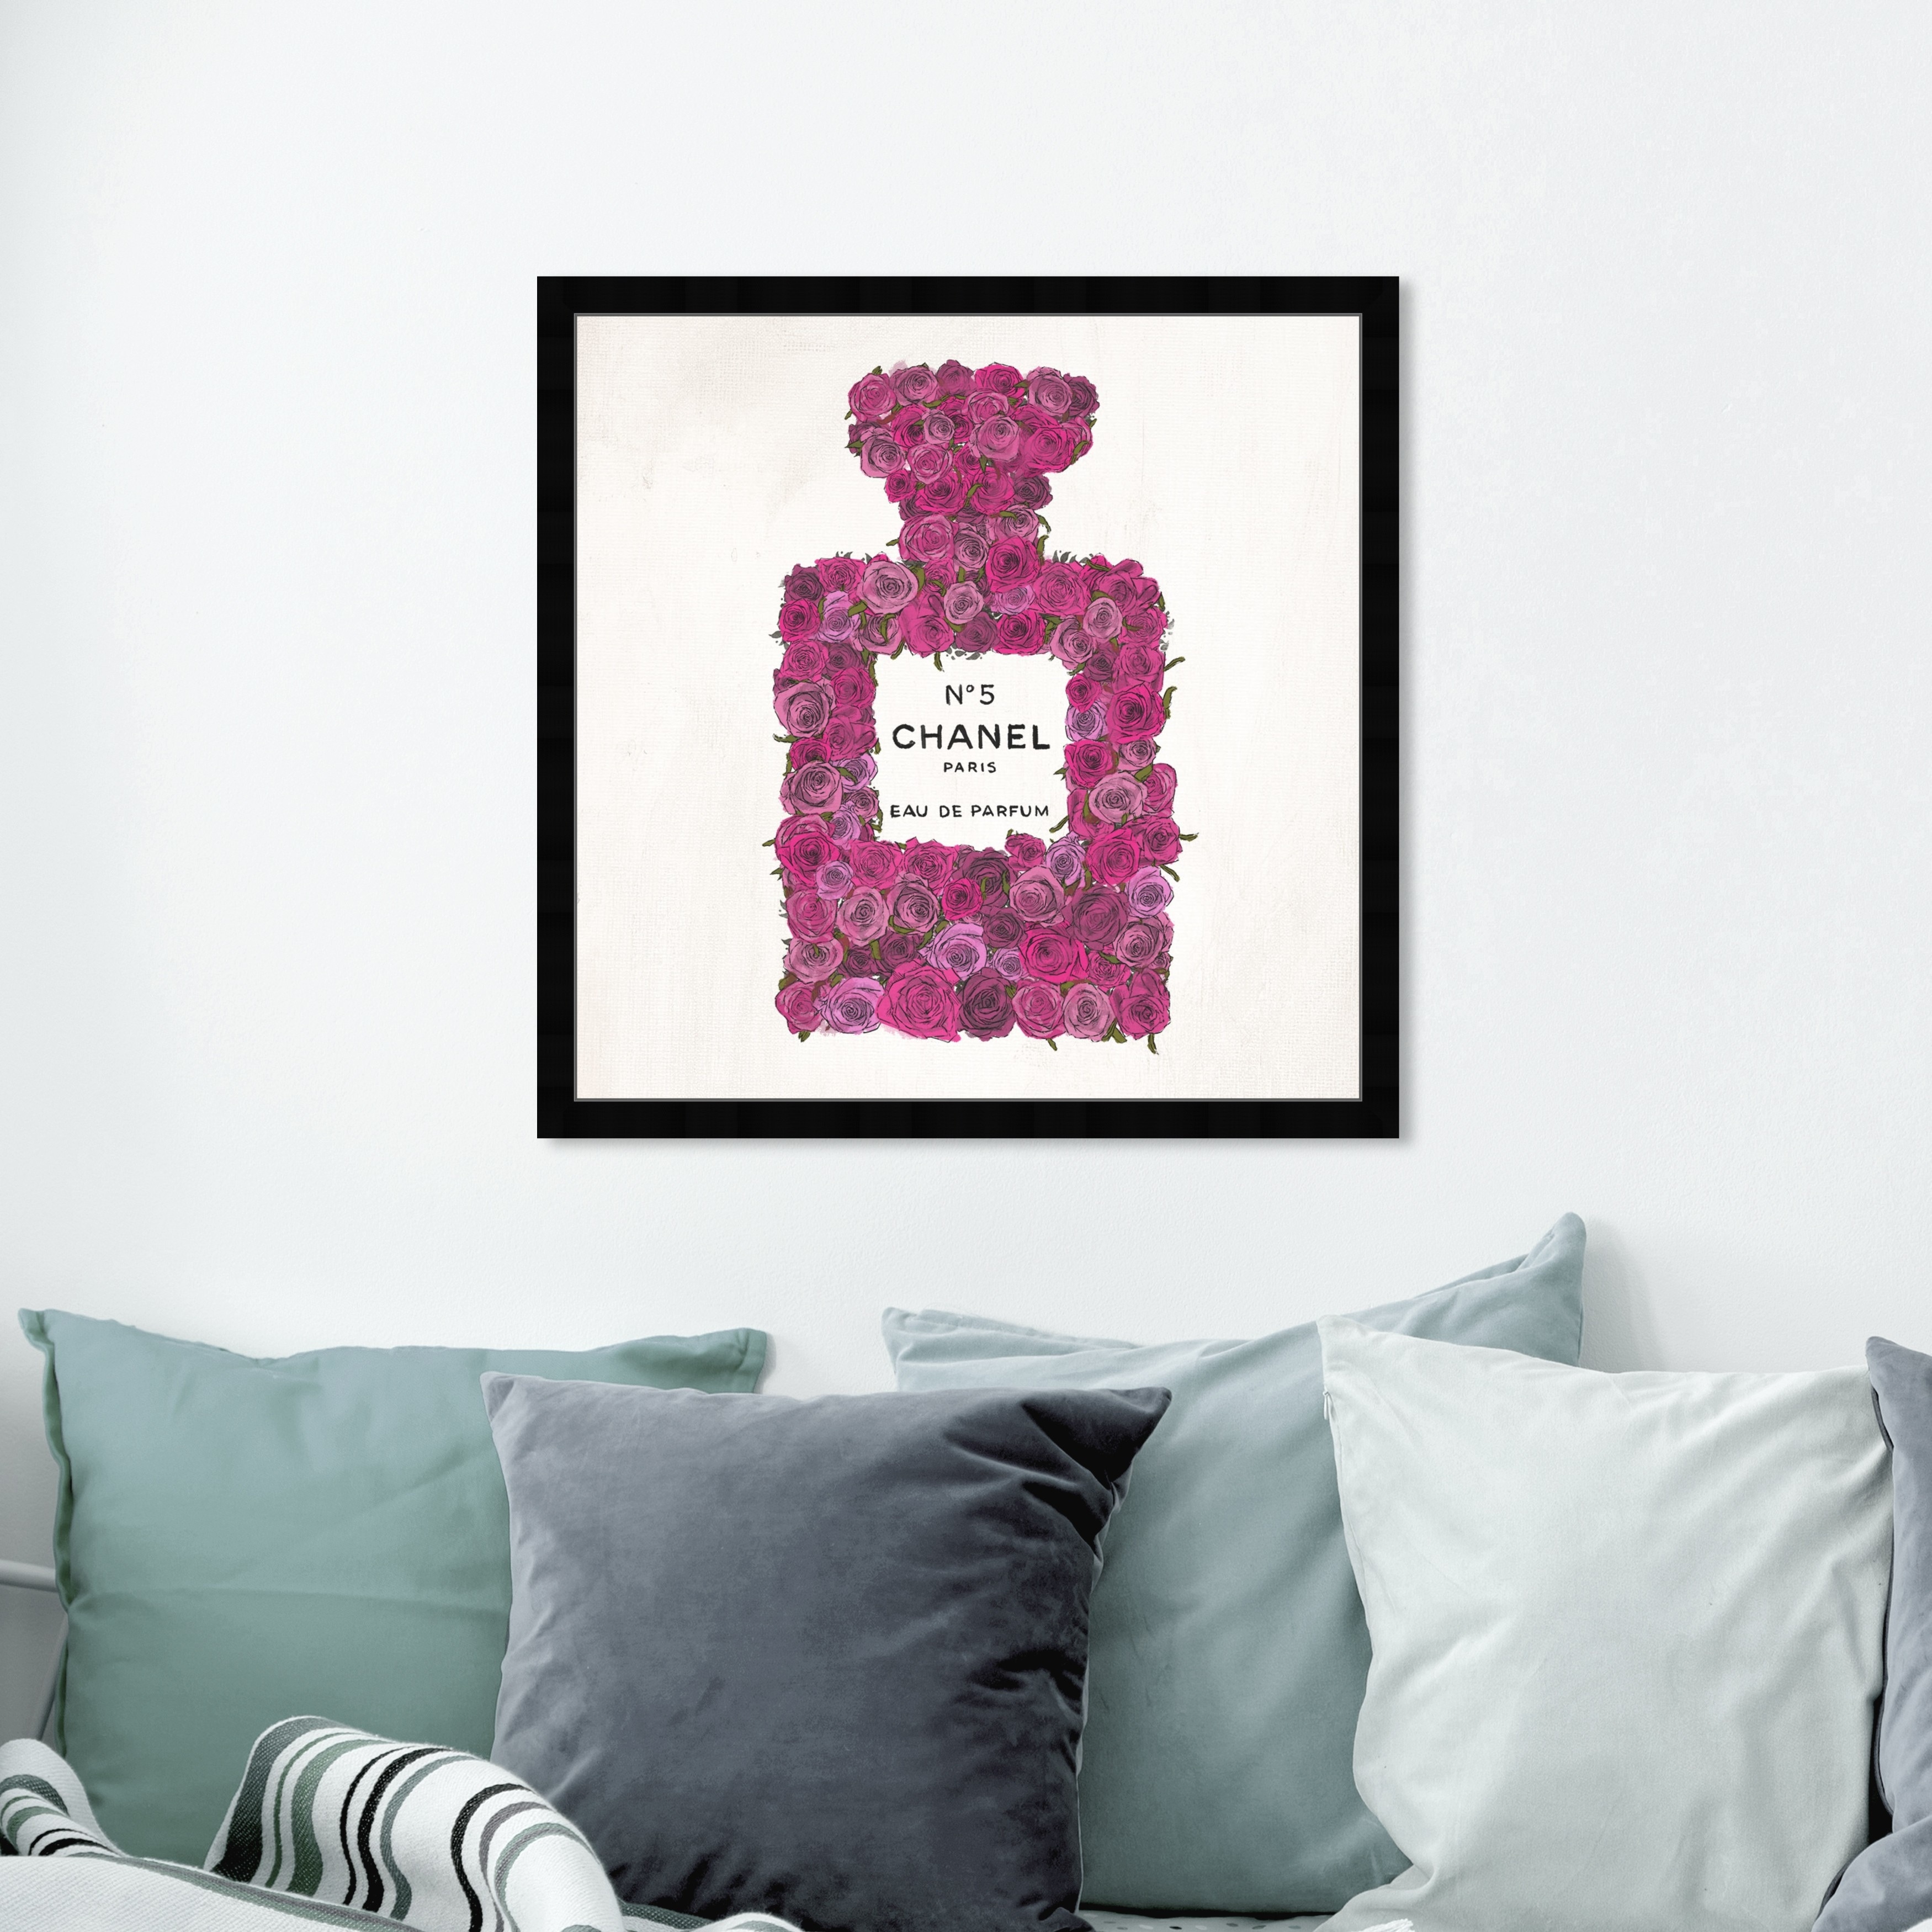 The Stupell Home Decor Collection Purple Flower Perfume Glam